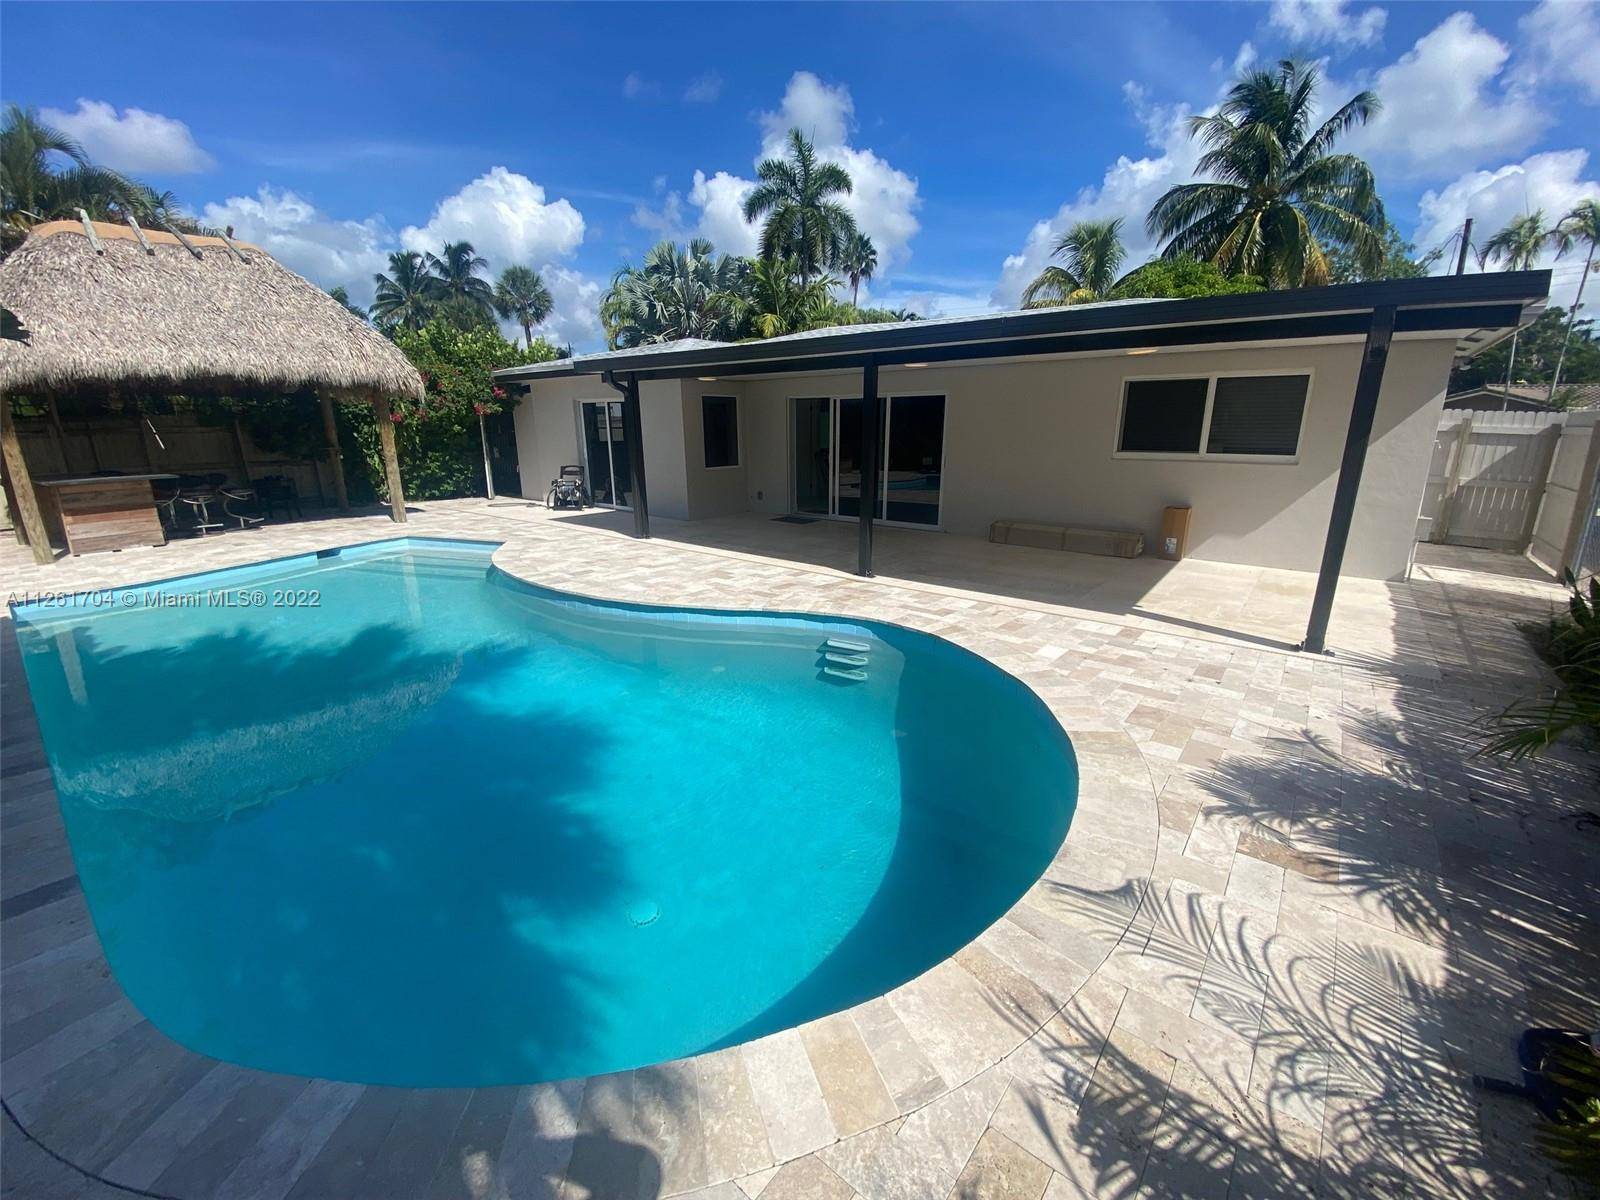 Fully remodeled paradise, nice and ready to move and enjoy fully, new roof, flooring, new converted garage, new impact windows, tiki bar, paved pool area, new sea wall completed a ...